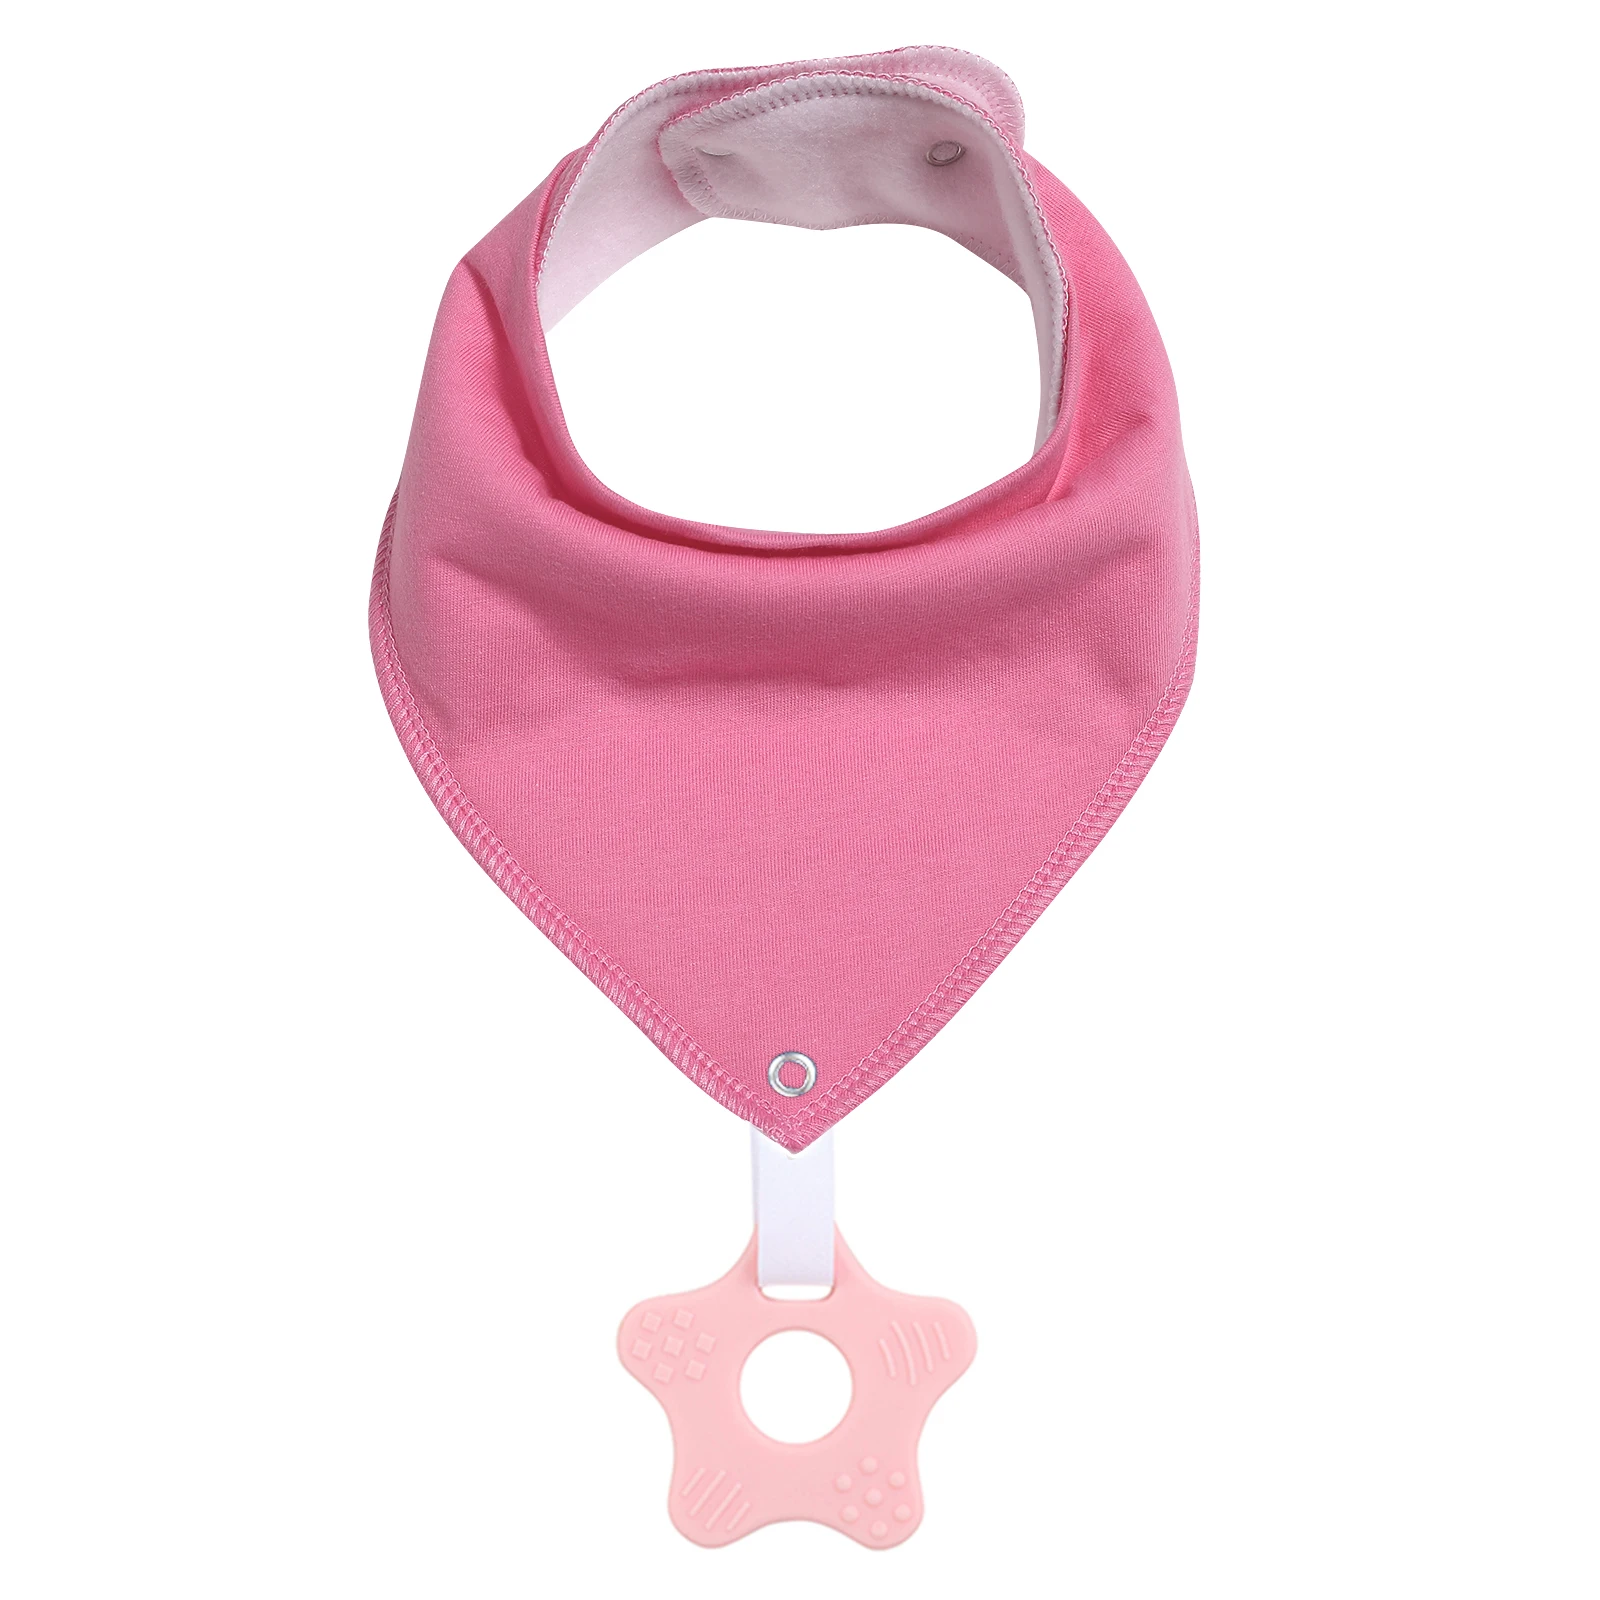 Baby Bandana Bibs with Teething Toys 100% Organic Cotton Bibs Super Absorbent Drool Bib with Teether for Boys & Girls designer baby accessories Baby Accessories